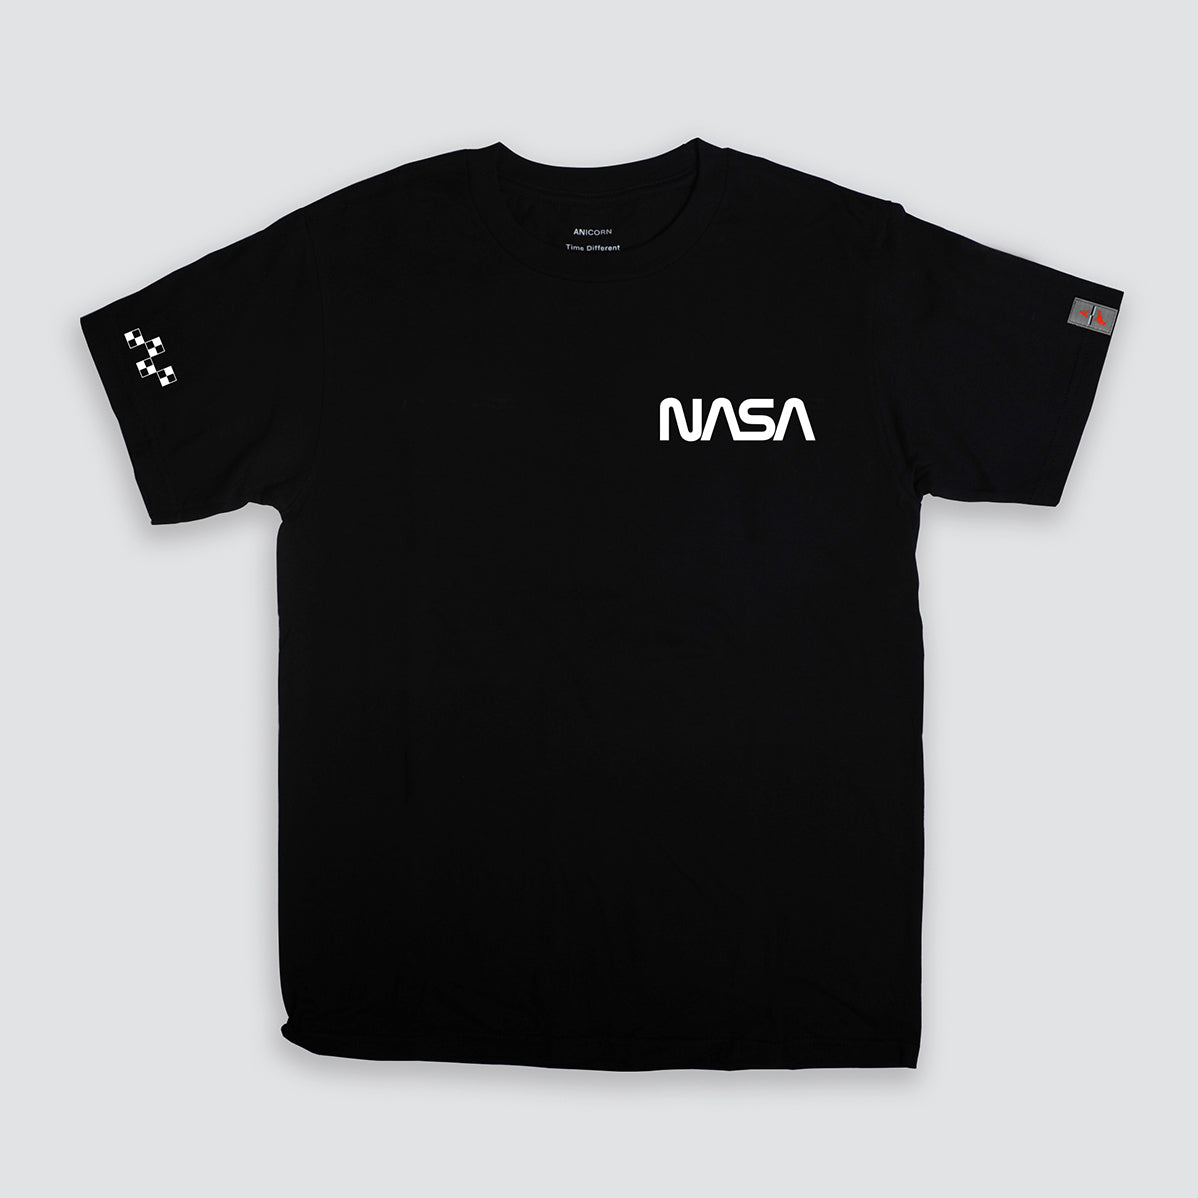 Featuring the upside down Zero Gravity Pigeon and the NASA logo, “Pigeon Moon T” displays 10 facts about our neighbor – the Moon from 238,855 miles afar. The logo of PROJECT ARTEMIS is sewed on the left sleeve, balanced by the graphical roll patterns of spacecraft on the right sleeve. The heavyweight tee is only available in black color.